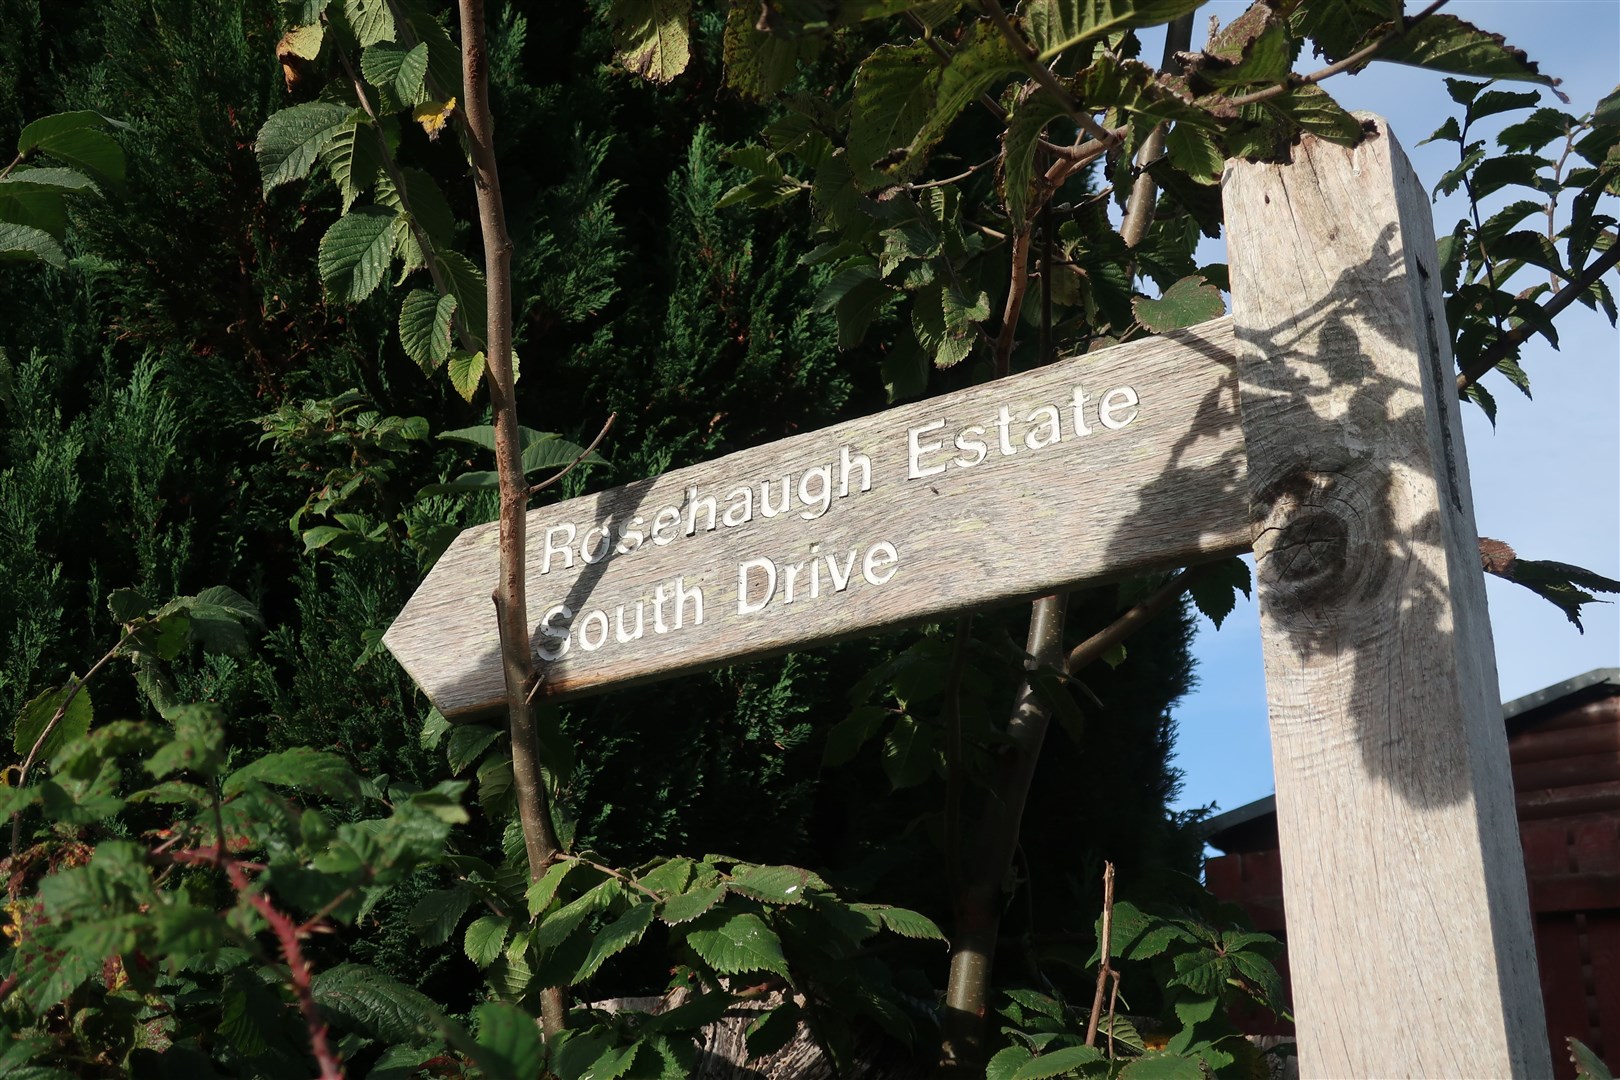 Path sign to Rosehaugh Estate via the South Drive..